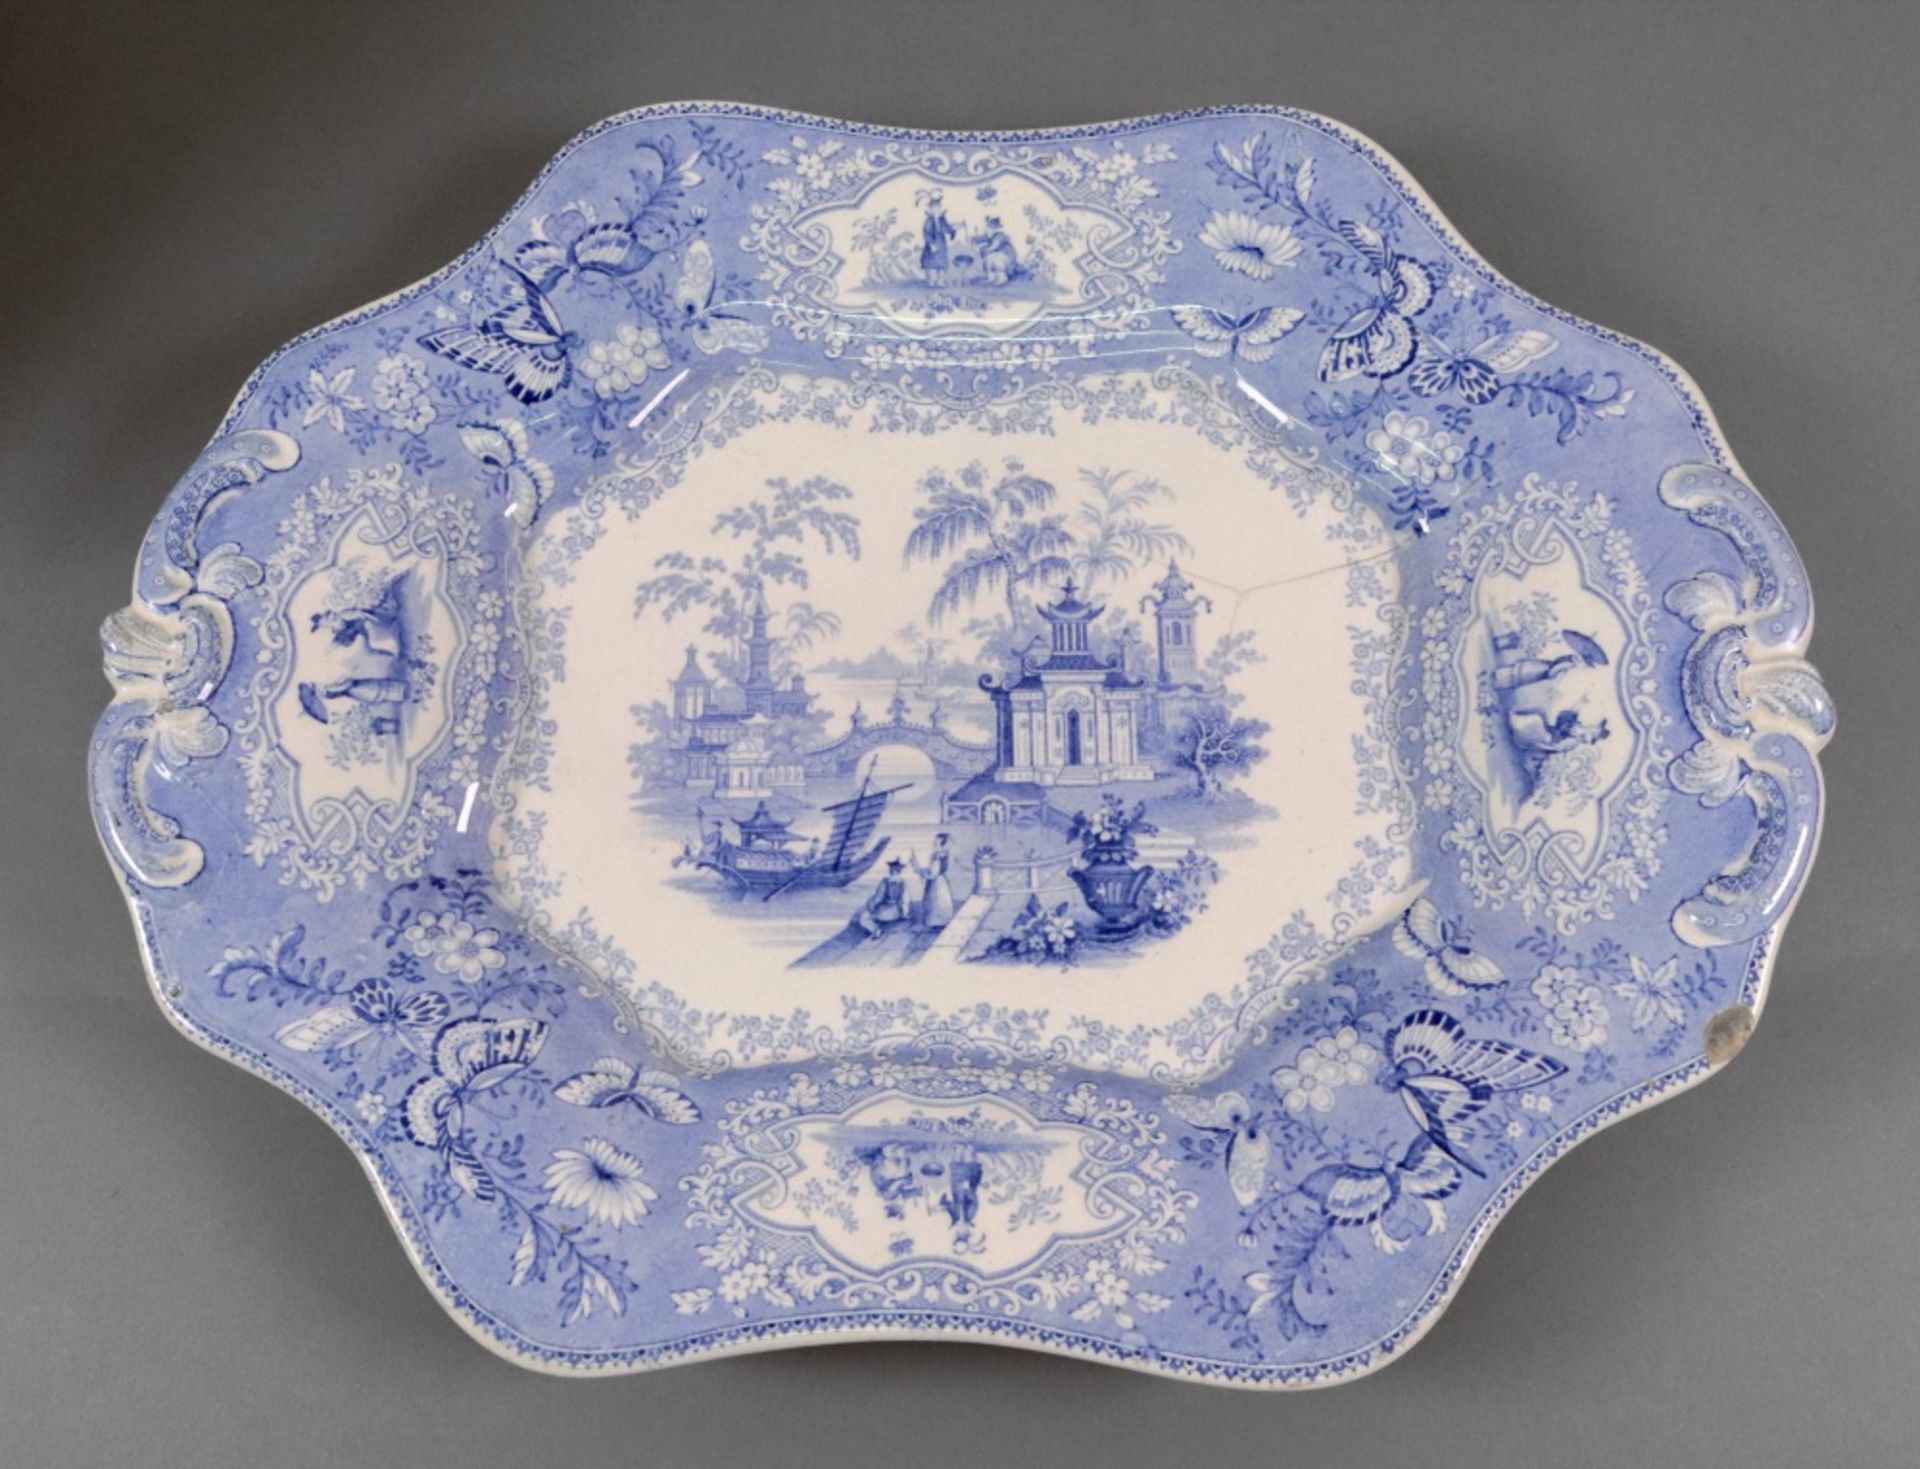 A Beauties china blue and white soup tureen, cover and stand, 19th century, - Image 6 of 8